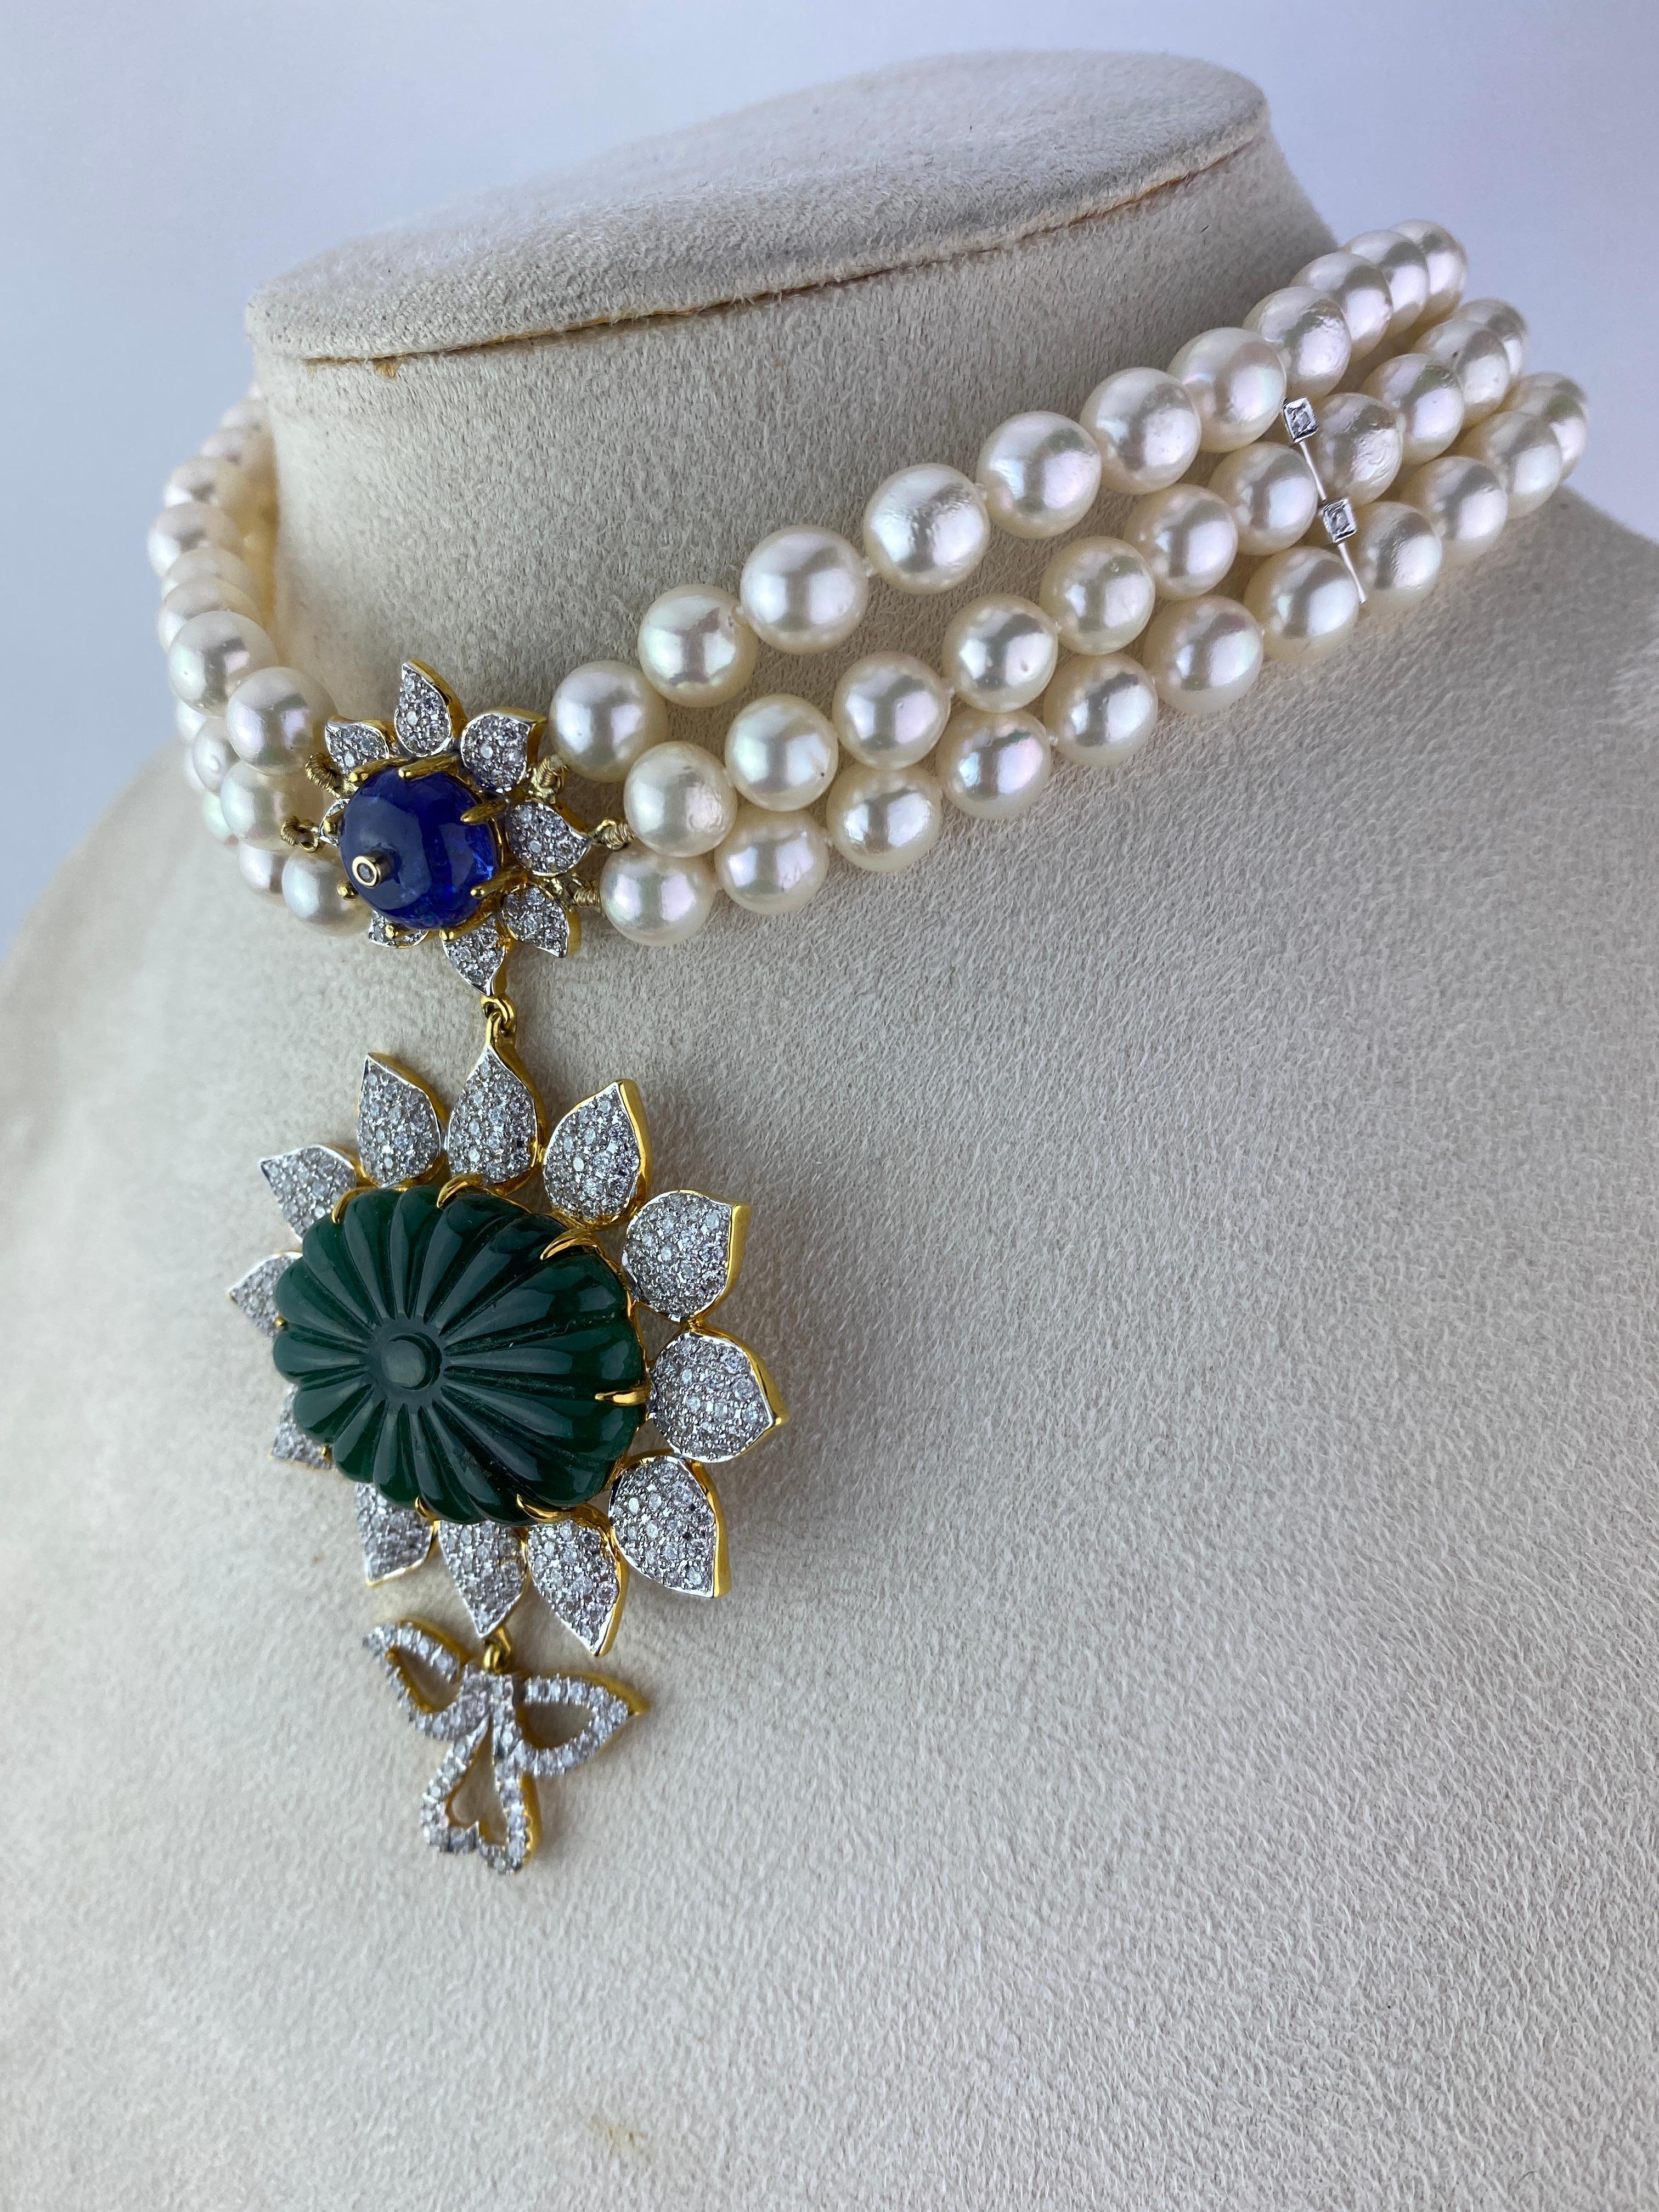 A beautiful, art-deco inspired choker - with 28.95 carat carved Emerald, 5.92 carat Tanzanite, 3.76 carat White Diamonds set in 9K Yellow Gold. The length of the choker is currently 12 inches in length, but it can be altered according to your